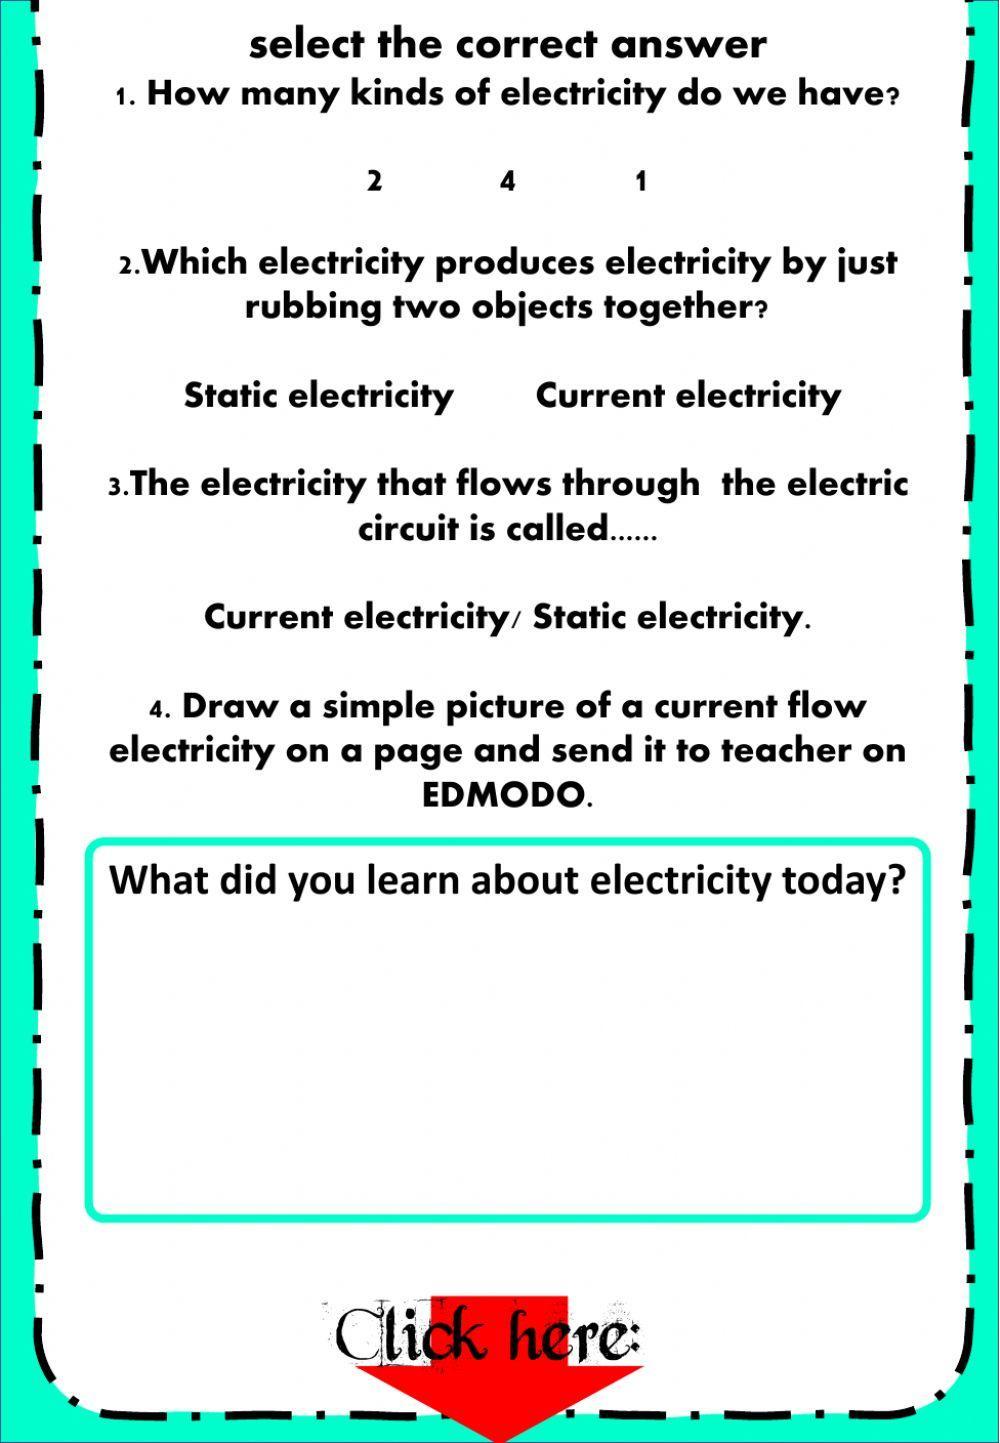 Week 16 - Science - Types of Electricity